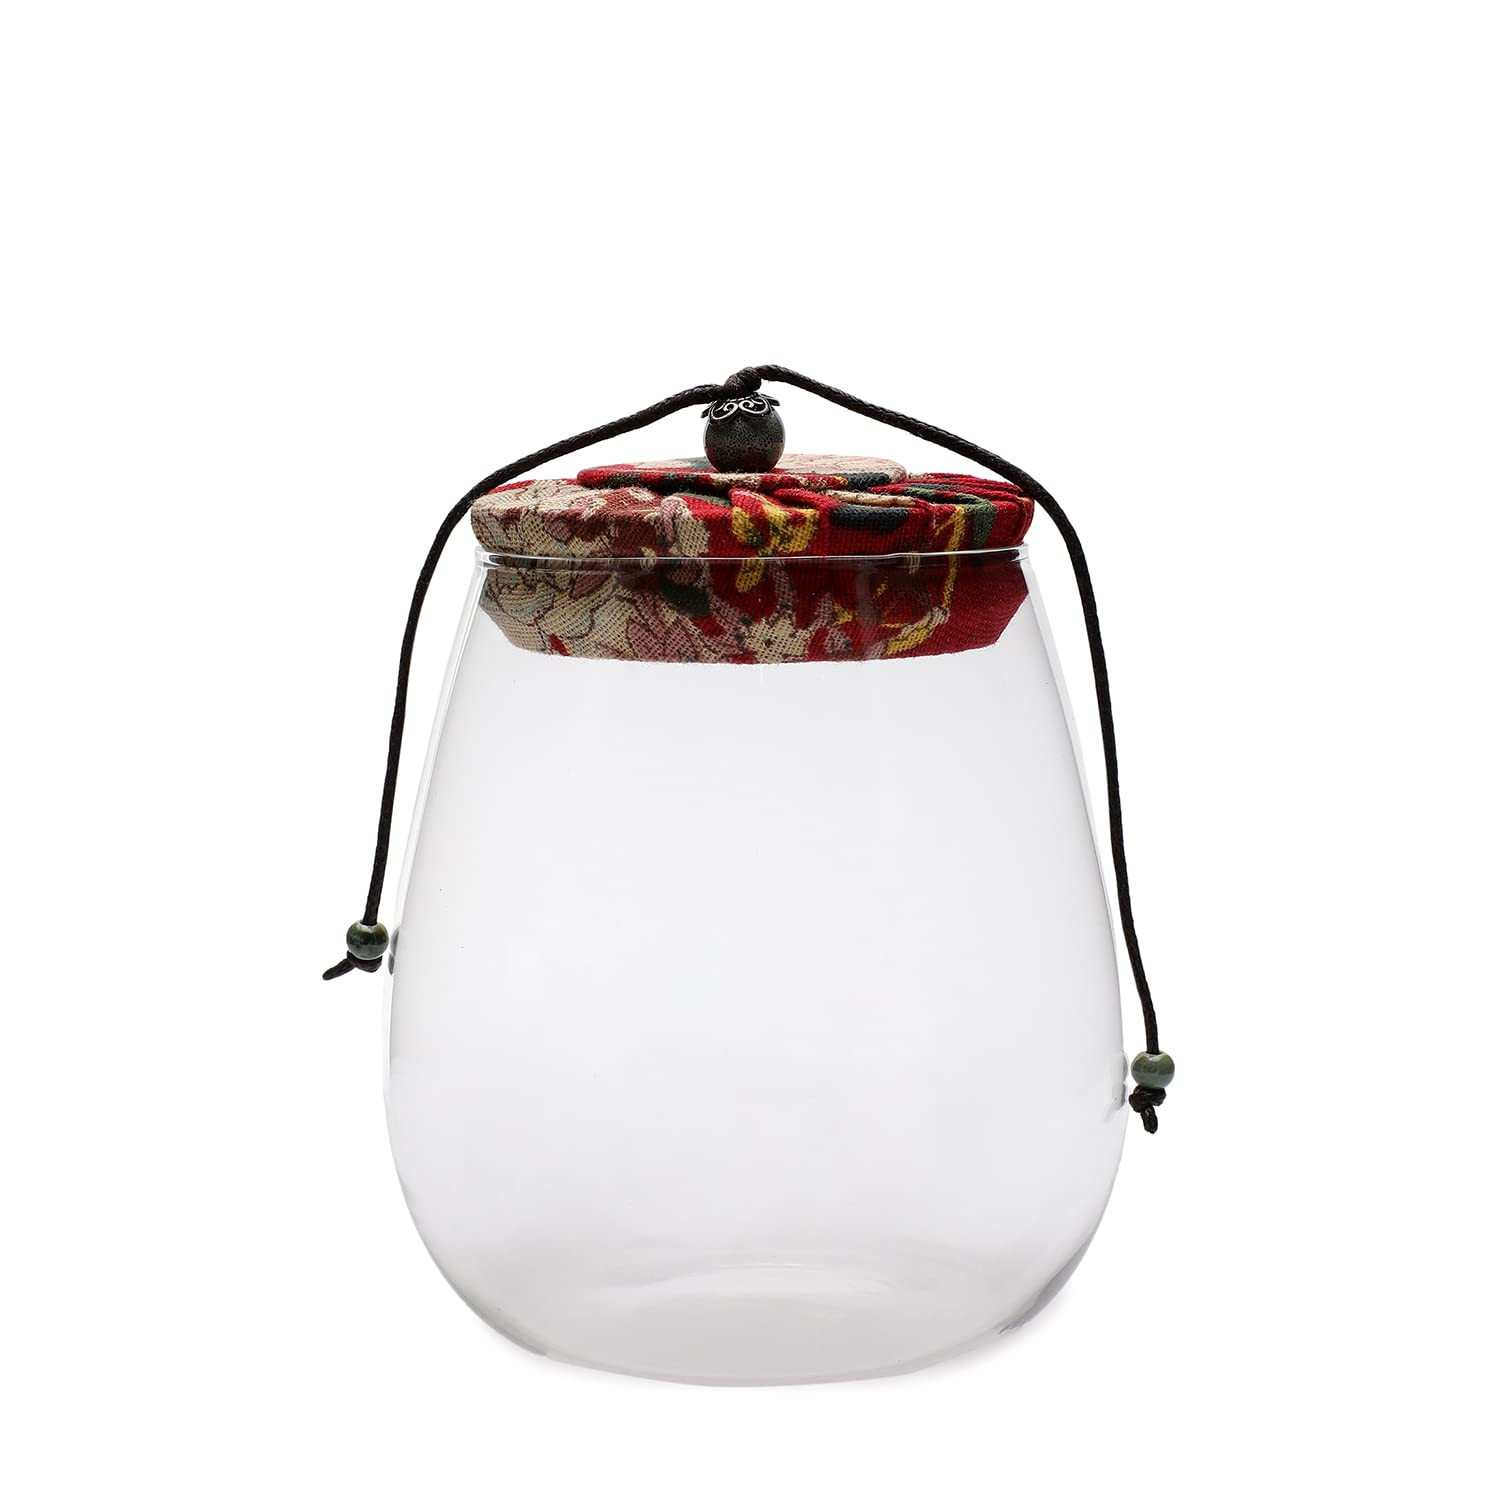 BONHOMIE Clear Solid Glass Storage Jar With Red Floral Fabric Lid For Home And Pantry, Airtight Food Jar Glass Container For Kitchen, For Dry Fruits, Spice, Masala, Pickle, Tea, Coffee, Pack Of 1